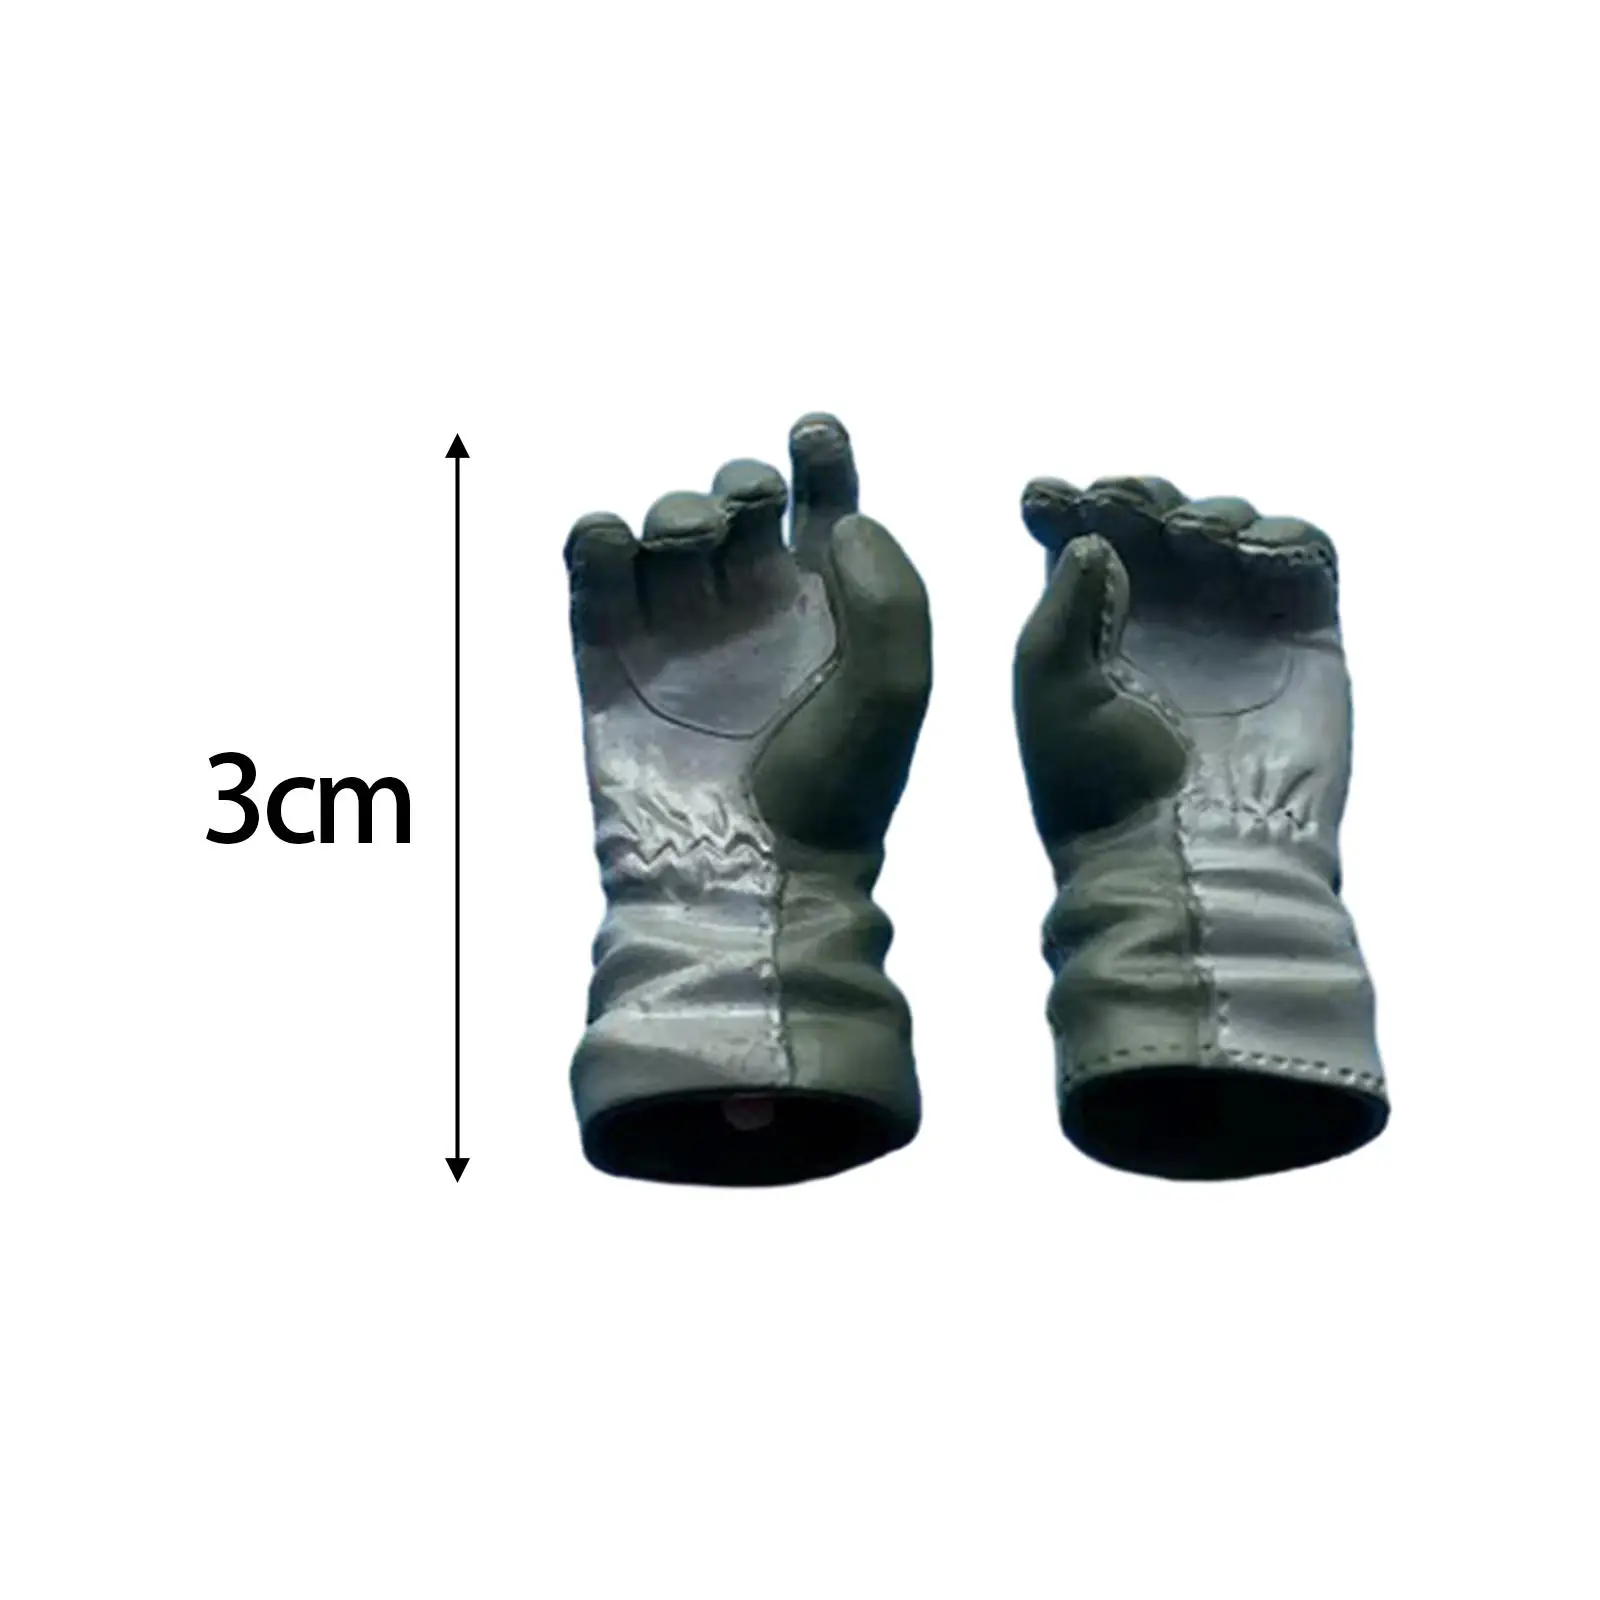 1/6 Scale Figure Gloves Model Miniature, Doll Accessories, Party Props Fashion Costume Accessory for 12inch Action Figures